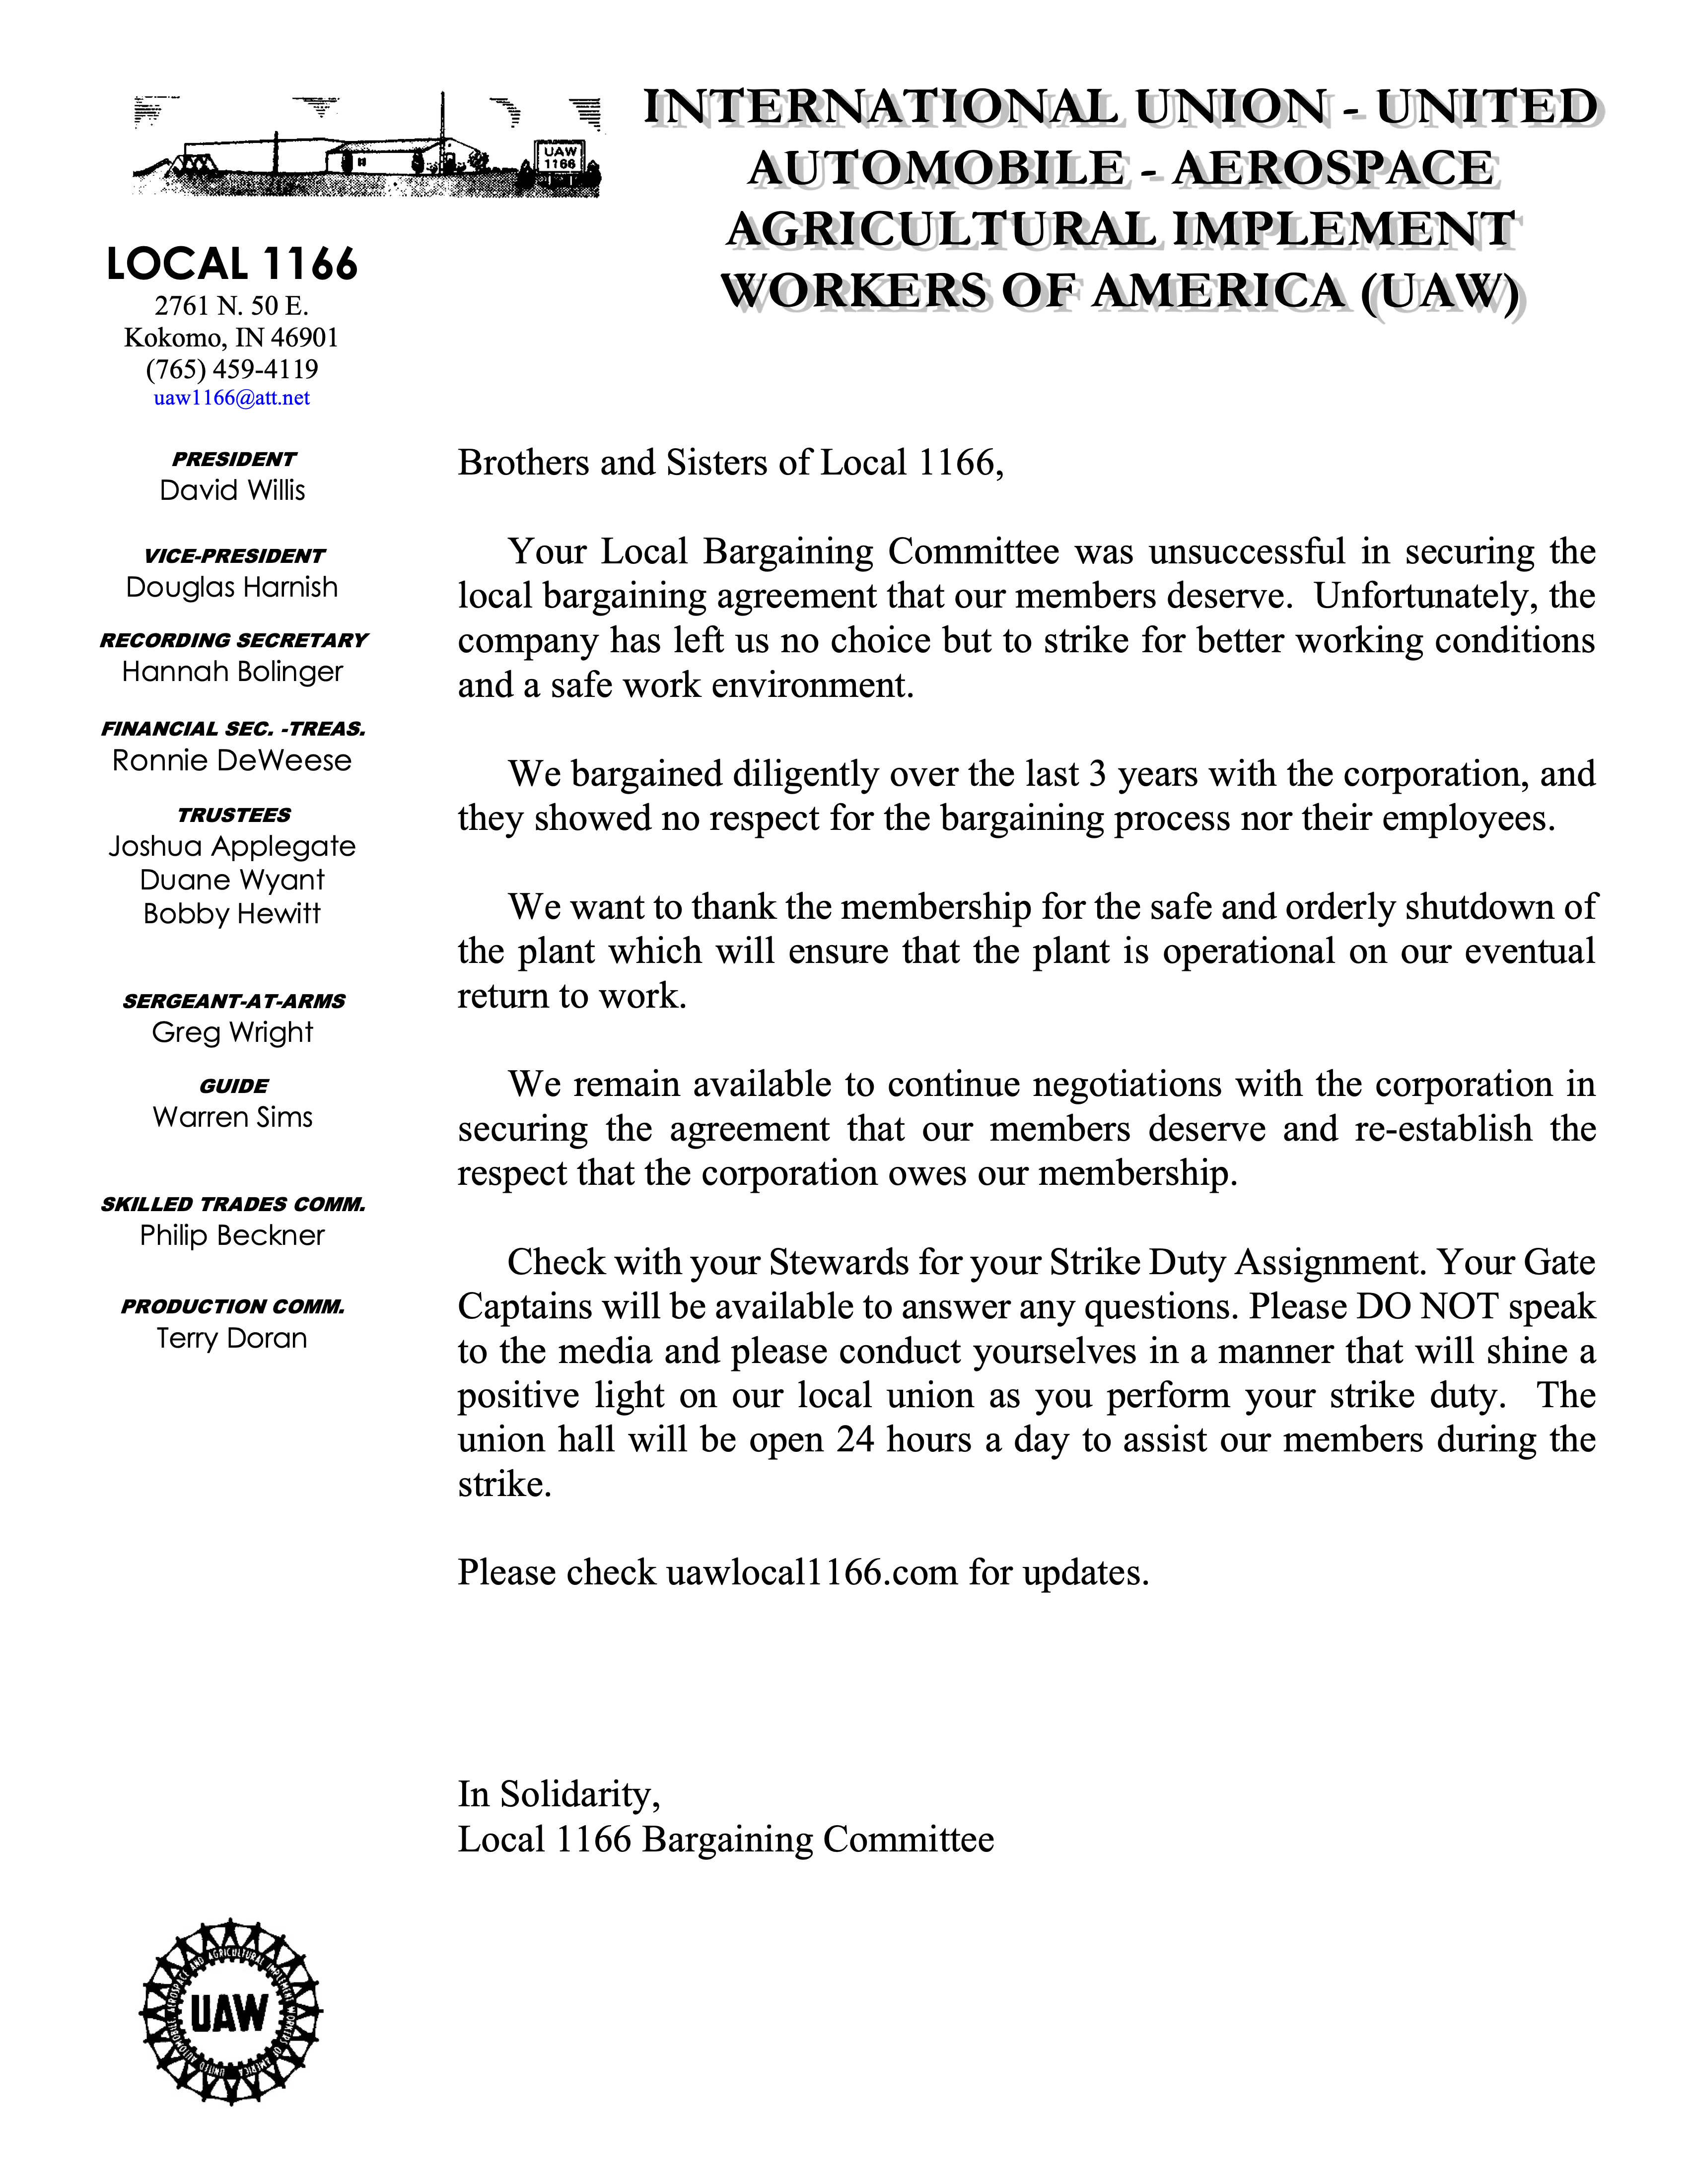 Letter from our Local Bargaining Committee